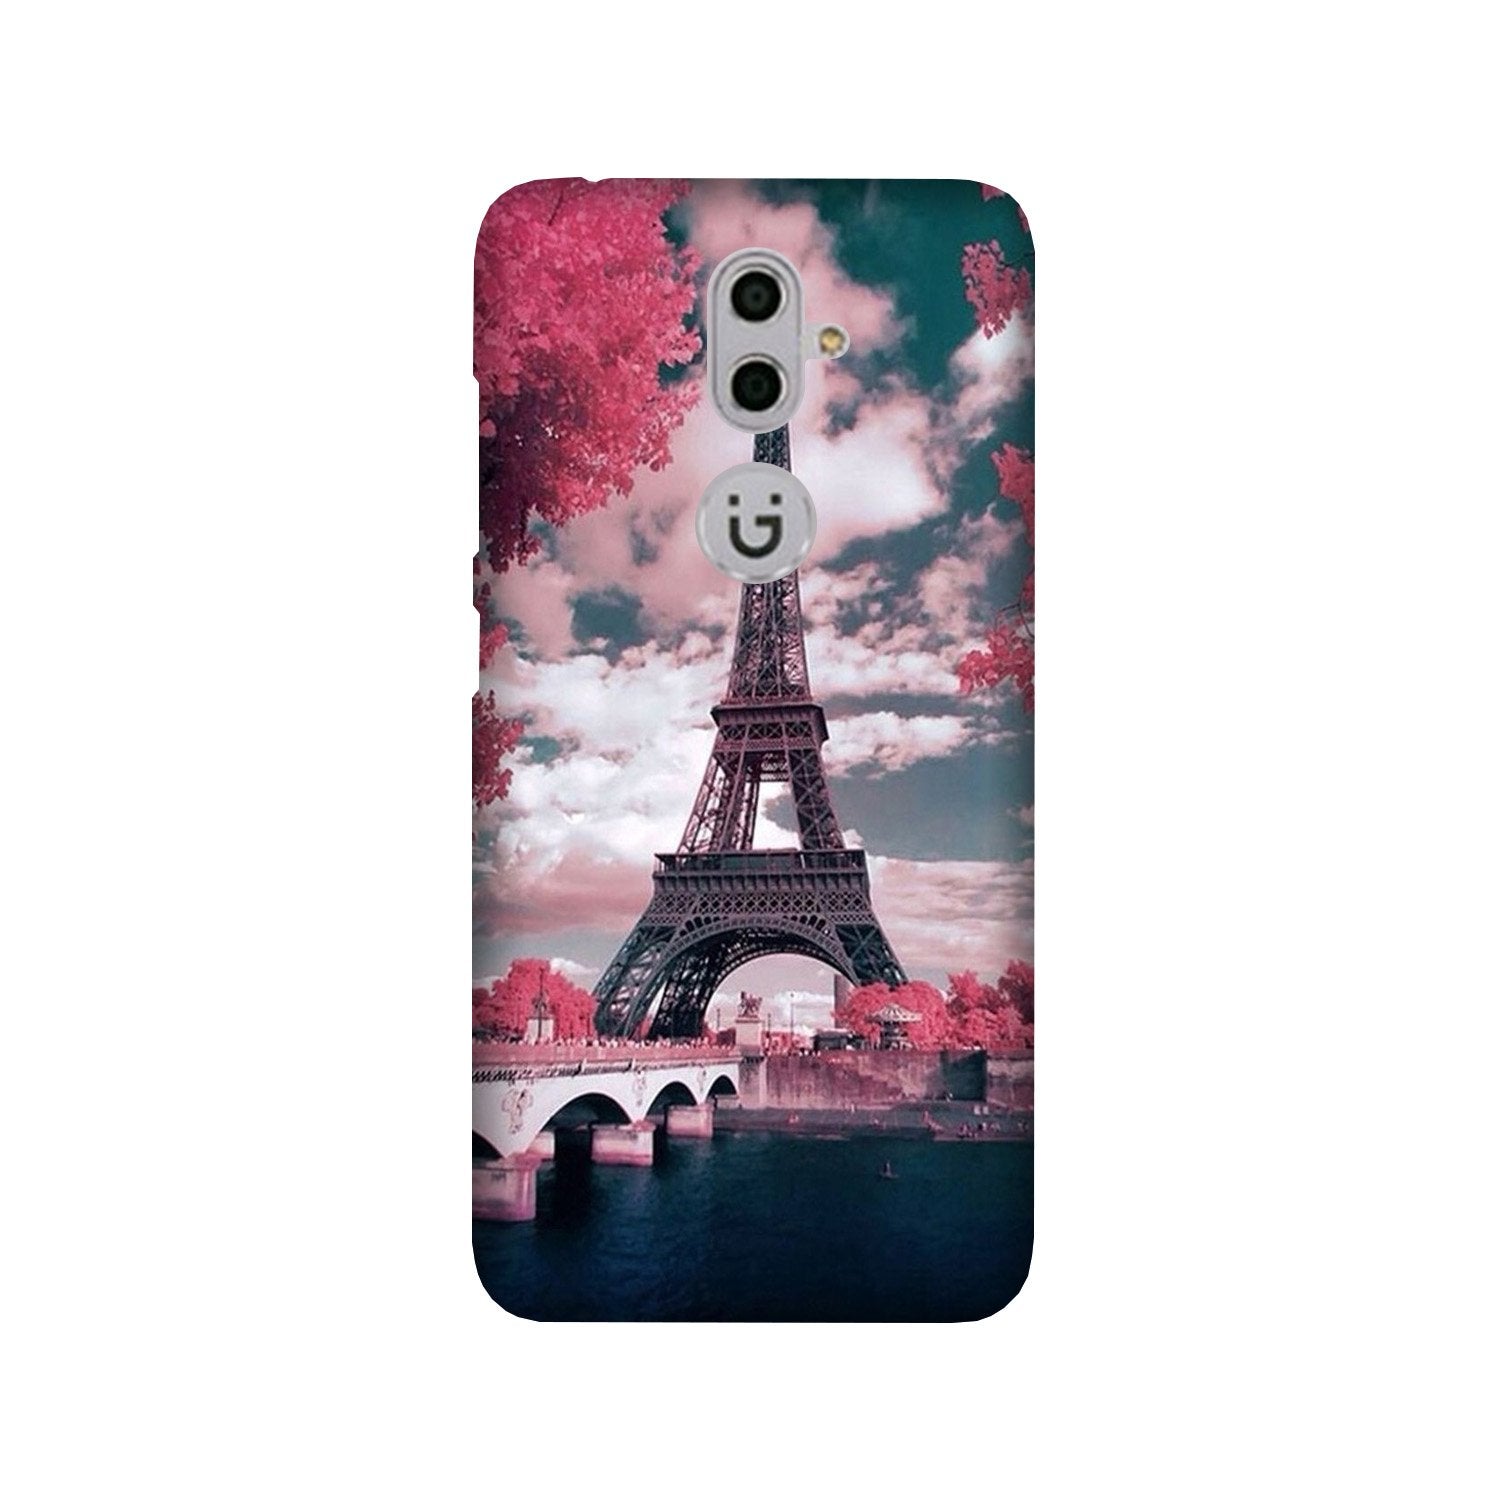 Eiffel Tower Case for Gionee S9  (Design - 101)